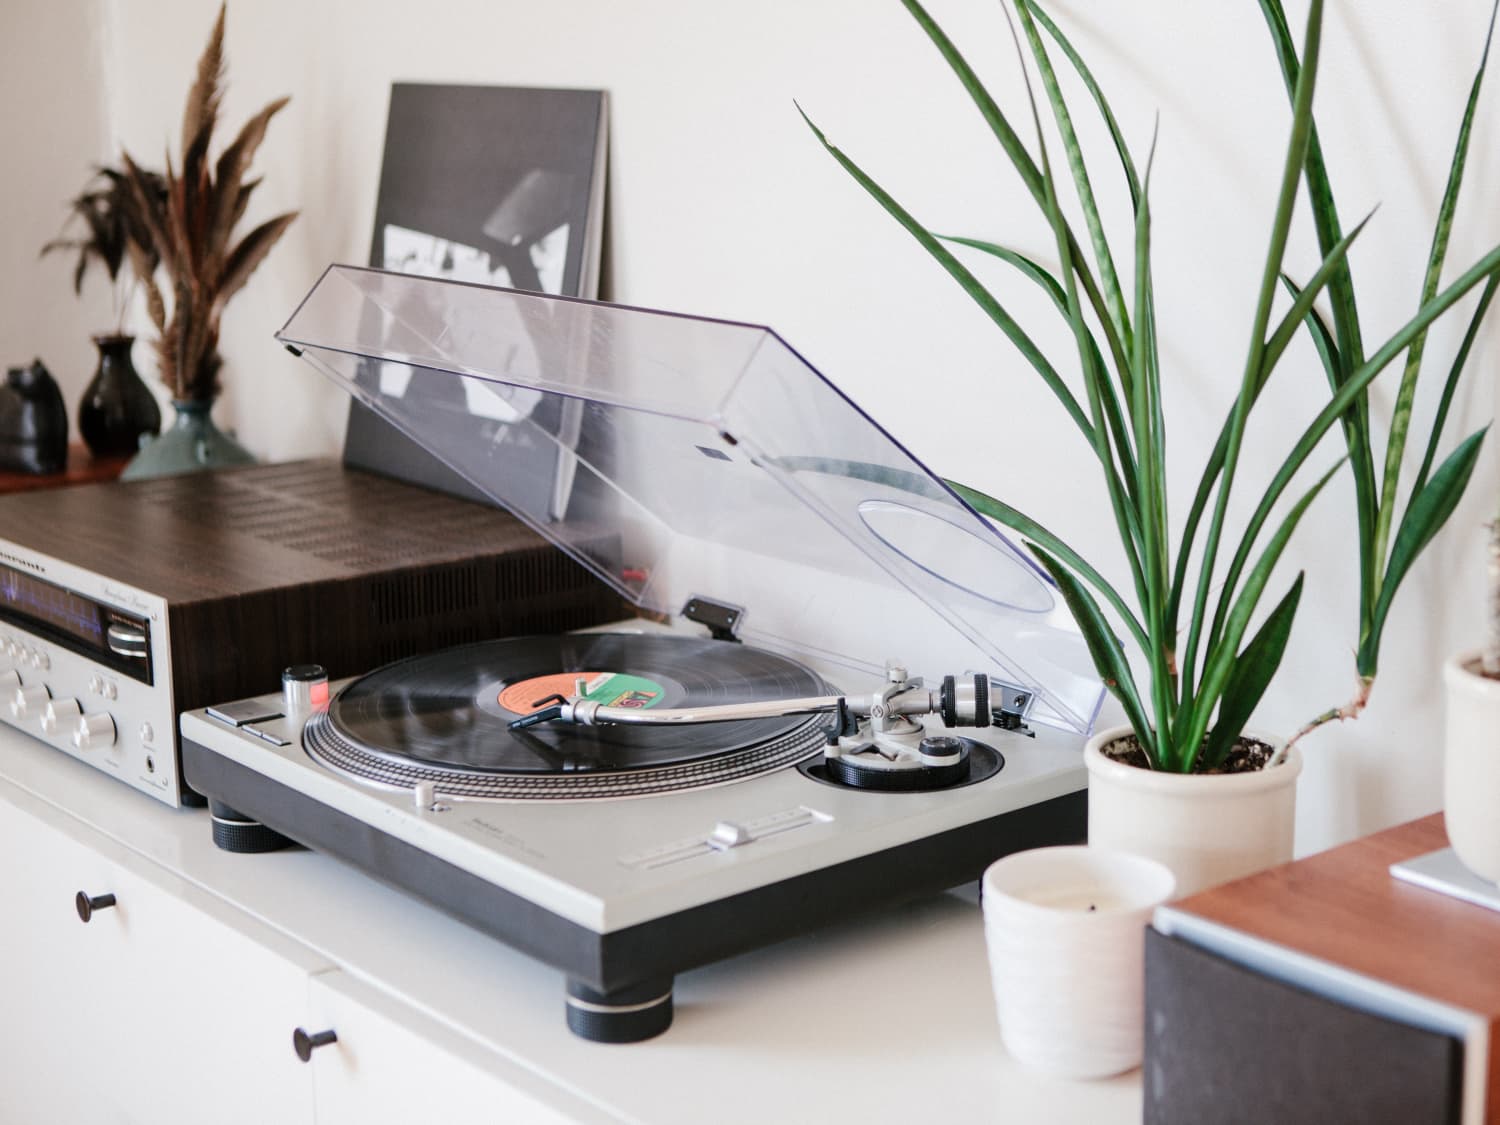 Best record players of 2022: 5 turntables for any music lover